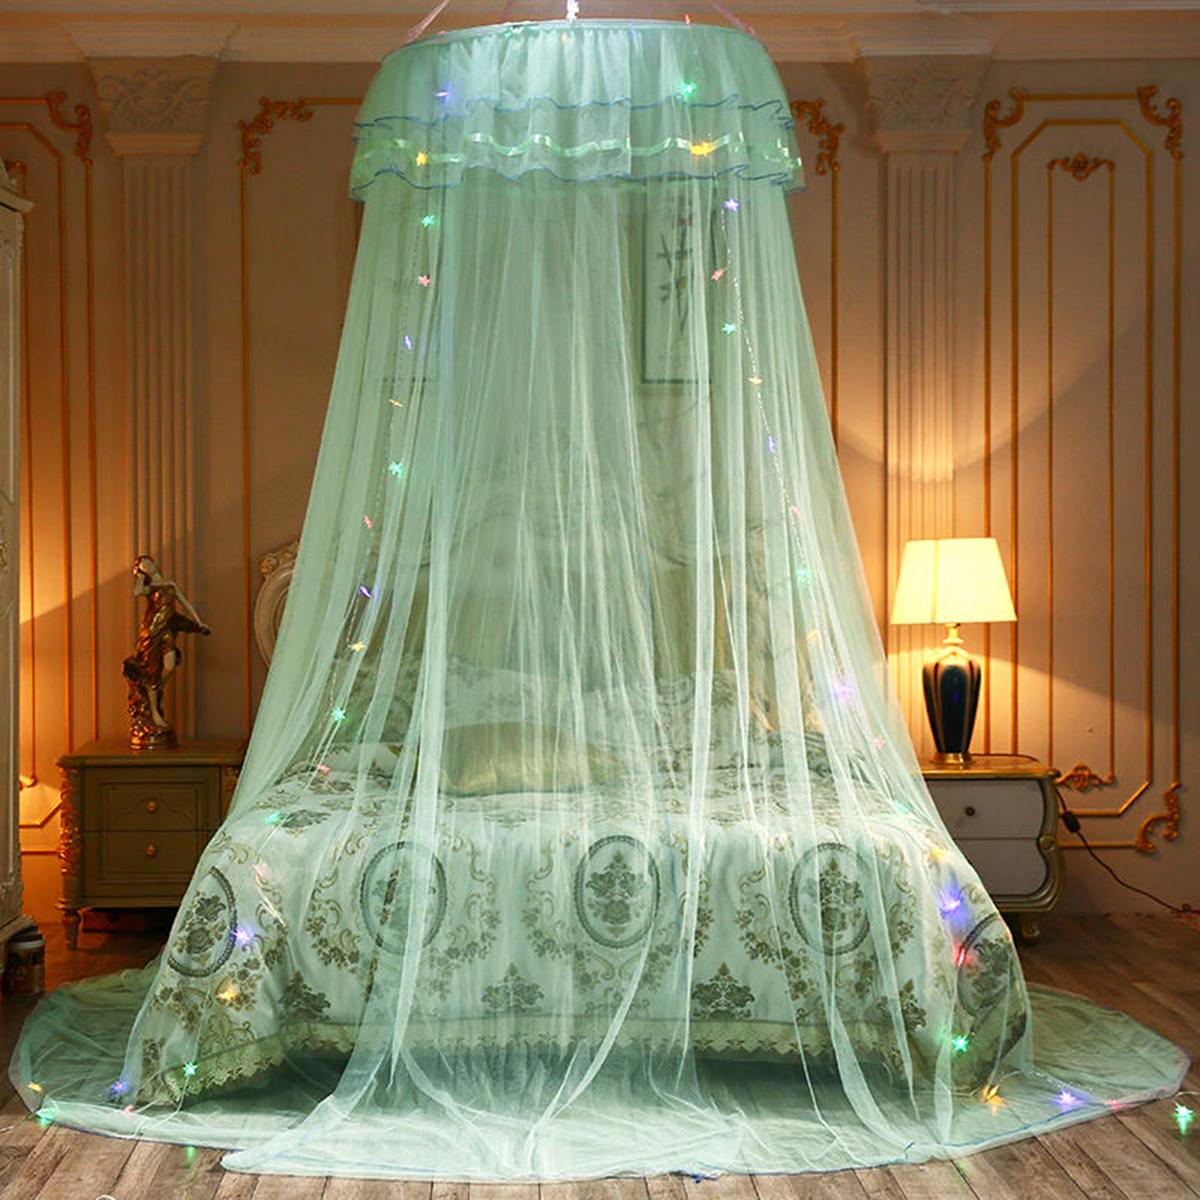 Mosquito-Net-Bedding-Lace-LED-Light-Princess-Dome-Mesh-Bed-Canopy-Bedroom-Decor-1682937-3